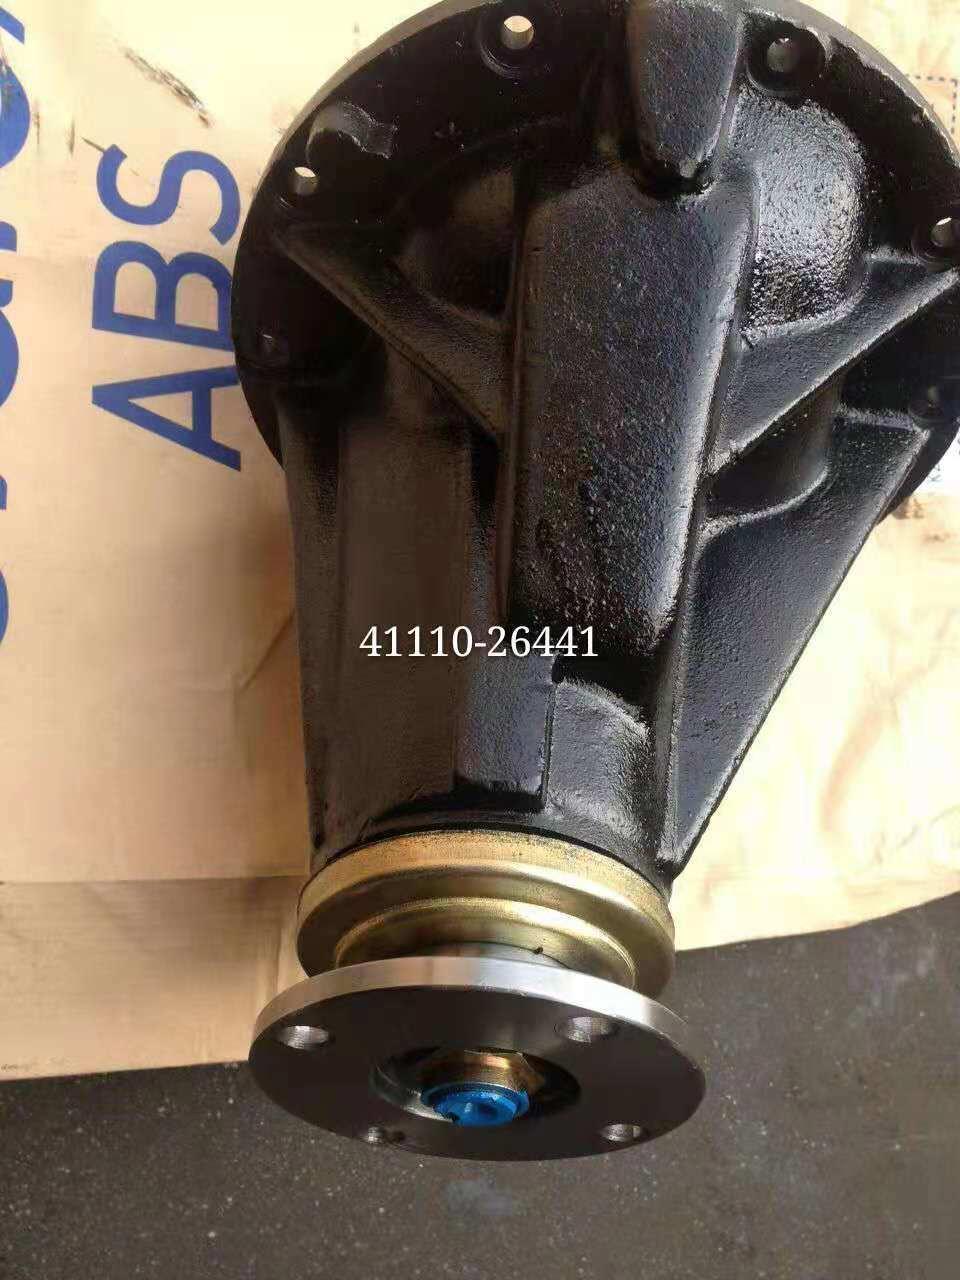 Differential for Toyota Pickup & Hiace Ratio 4.1 (10: 41)